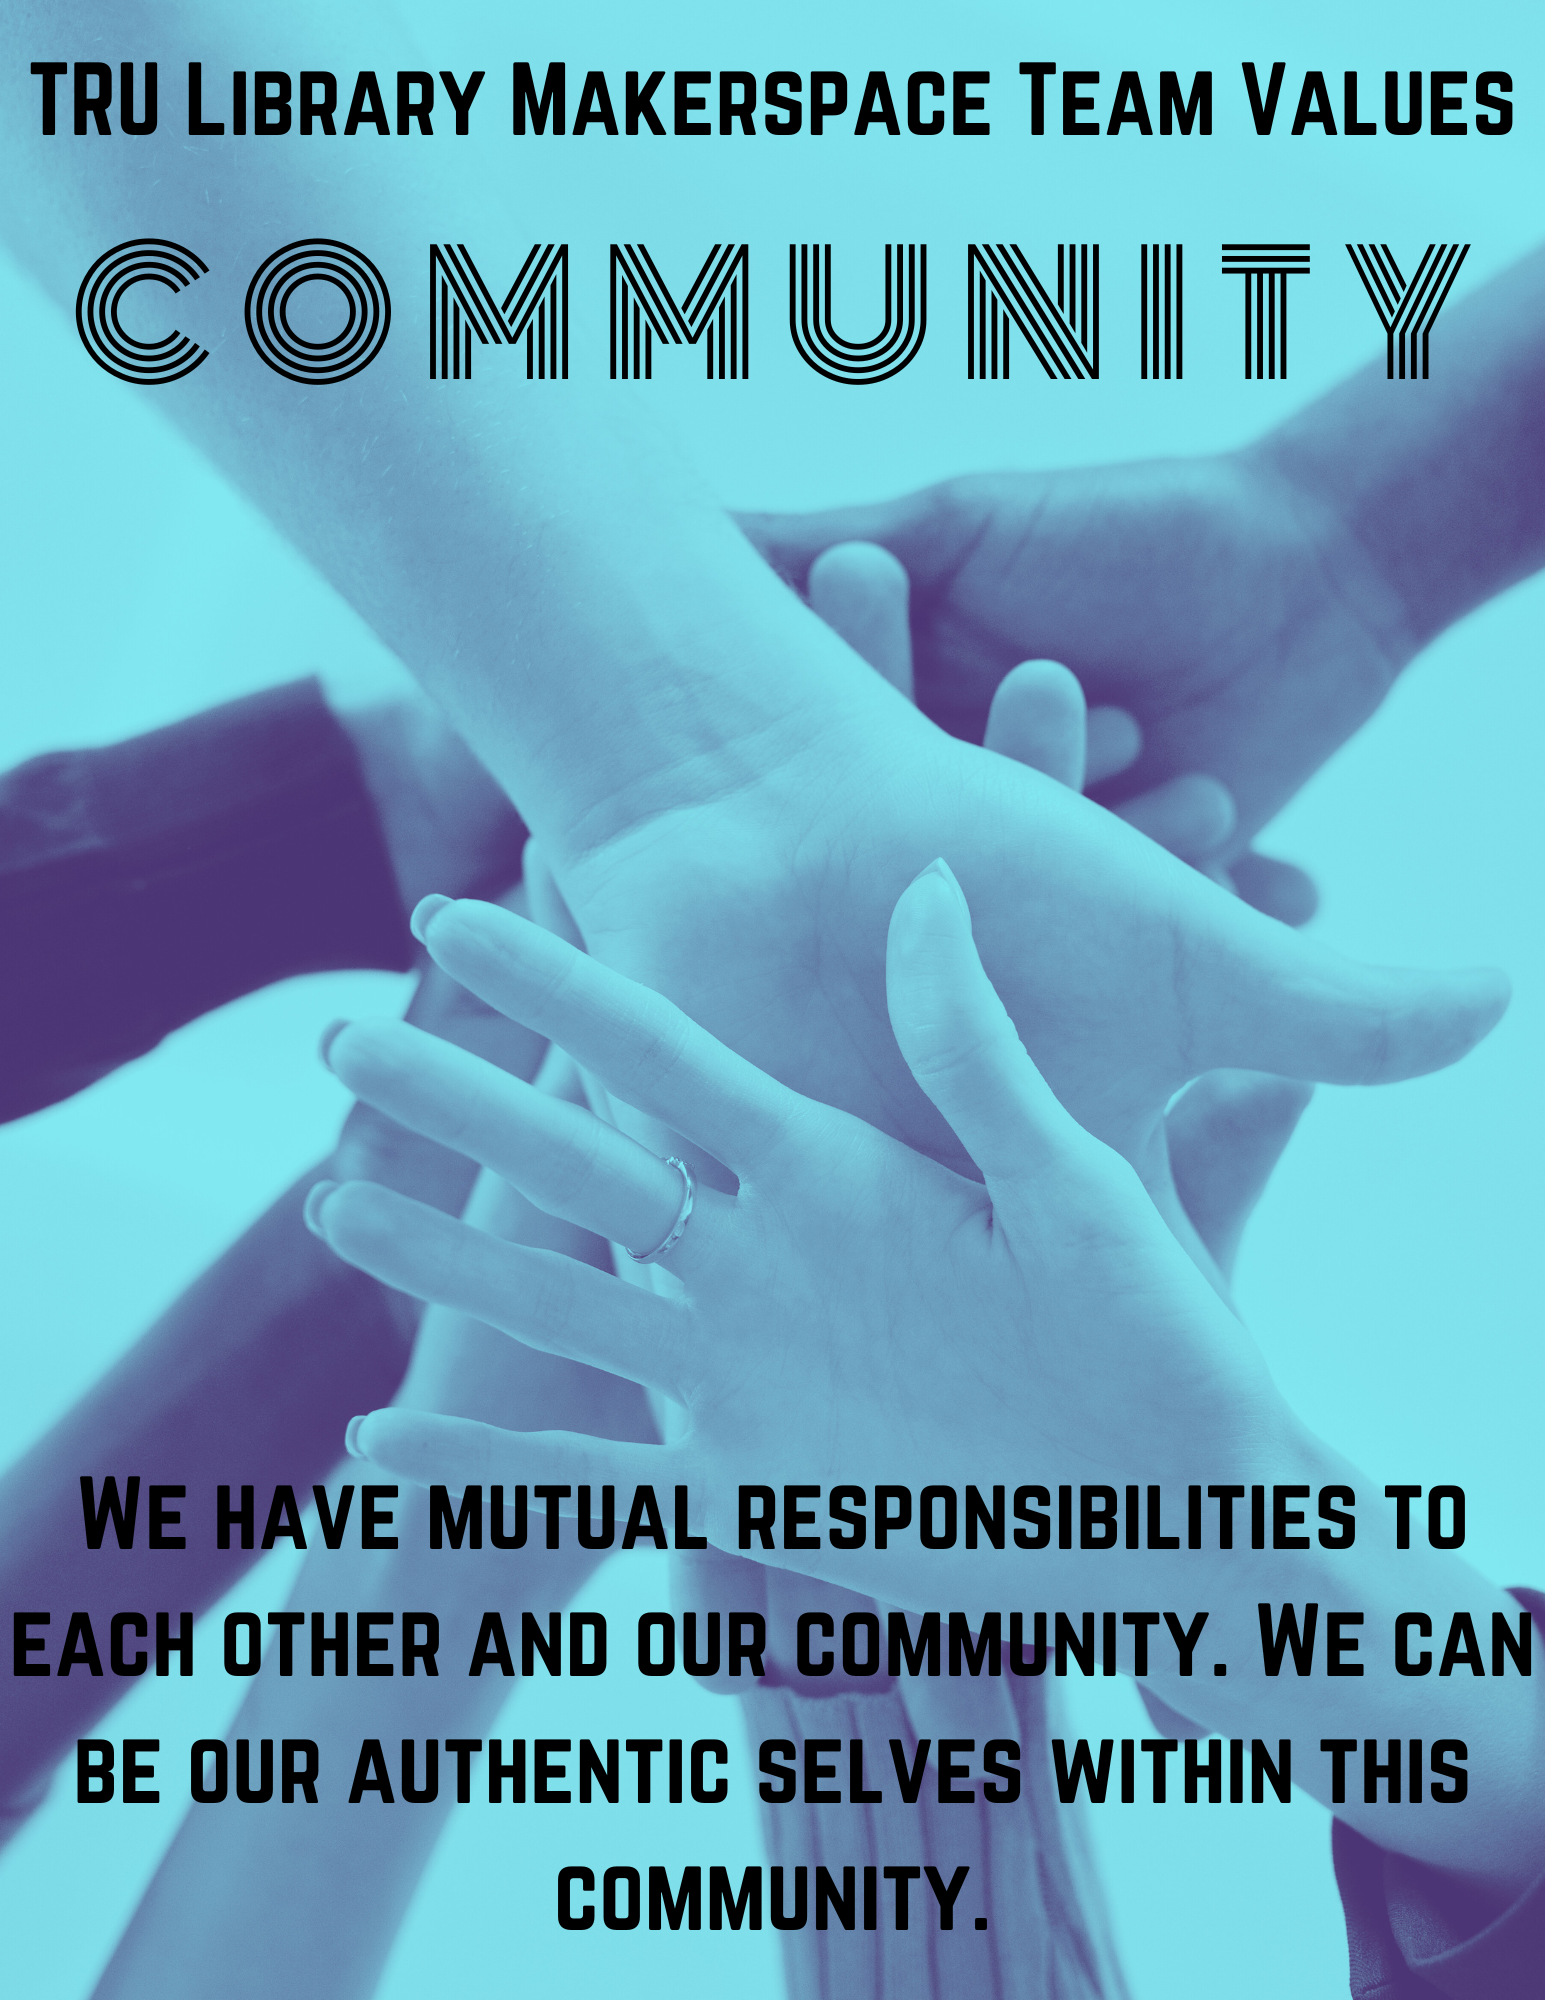 Community: We have mutual responsibilities to each other and our community. We can be our authentic selves within this community. This community extends beyond our immediate team to users, Ambassadors, Research Assistants, other LCSAs and Librarians, and the entire university community.